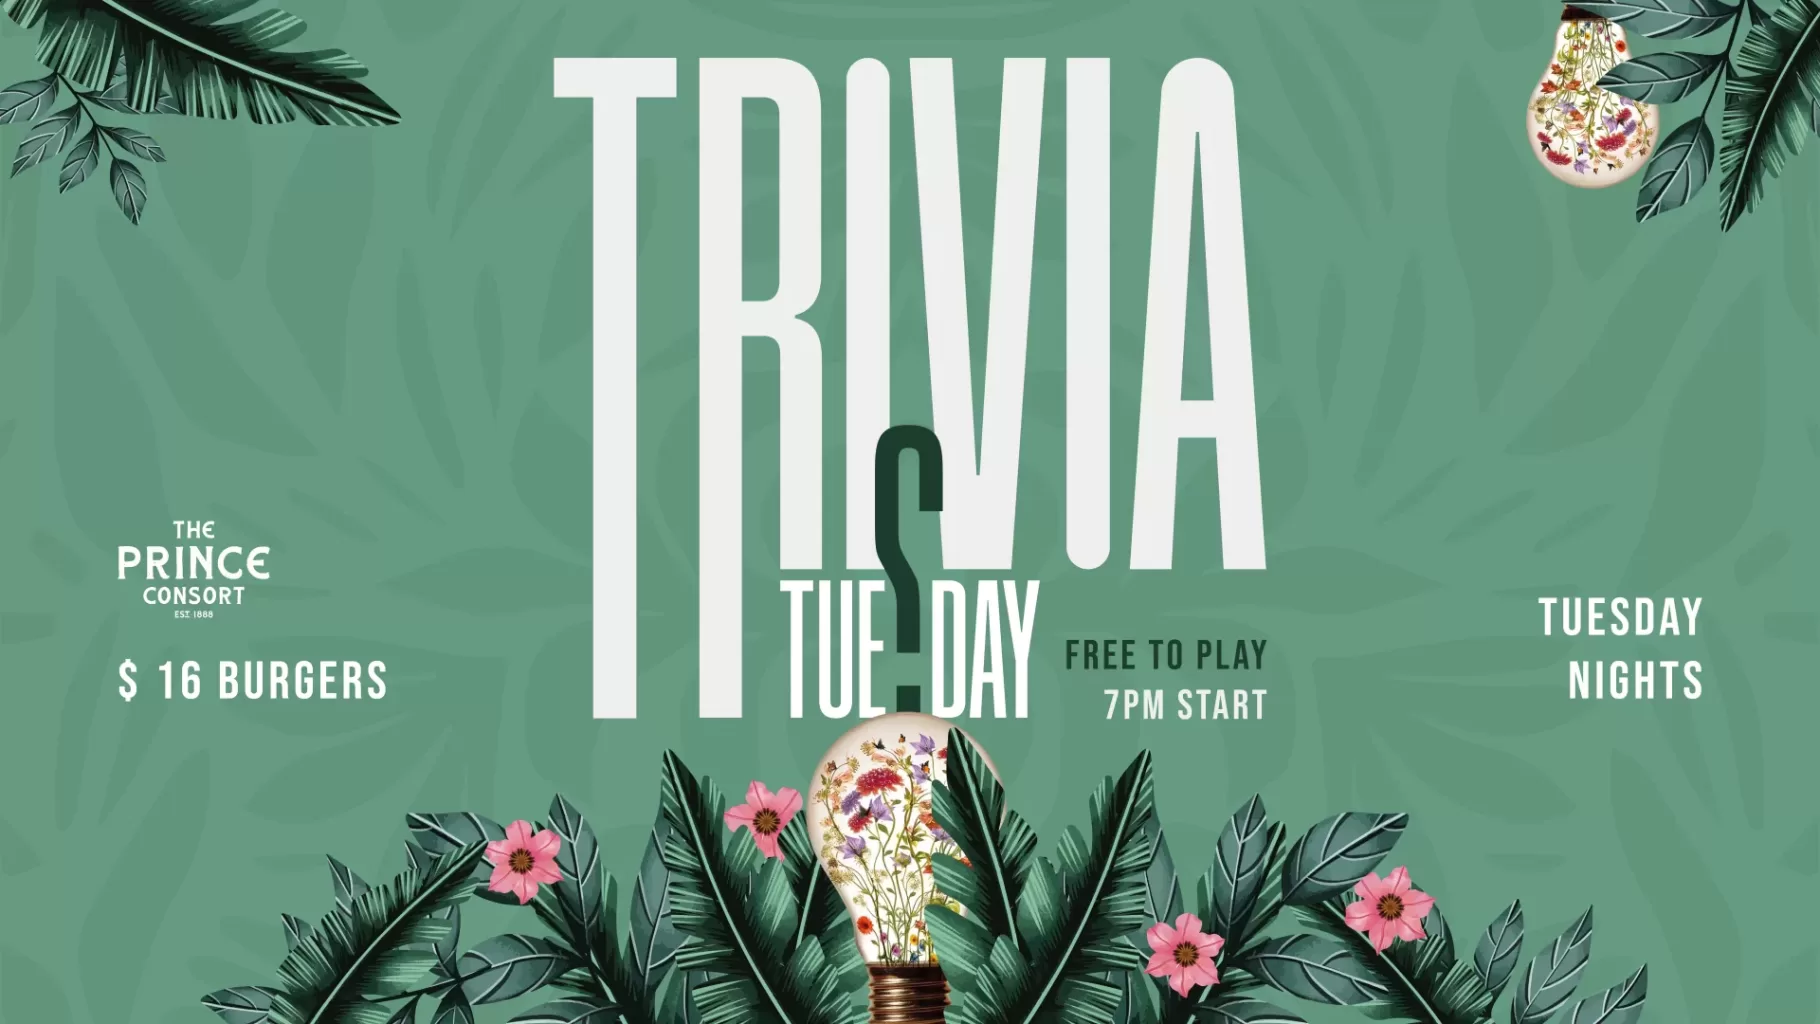 Get Your Tickets to Trivia Tuesdays | Whats on at The Prince Consort